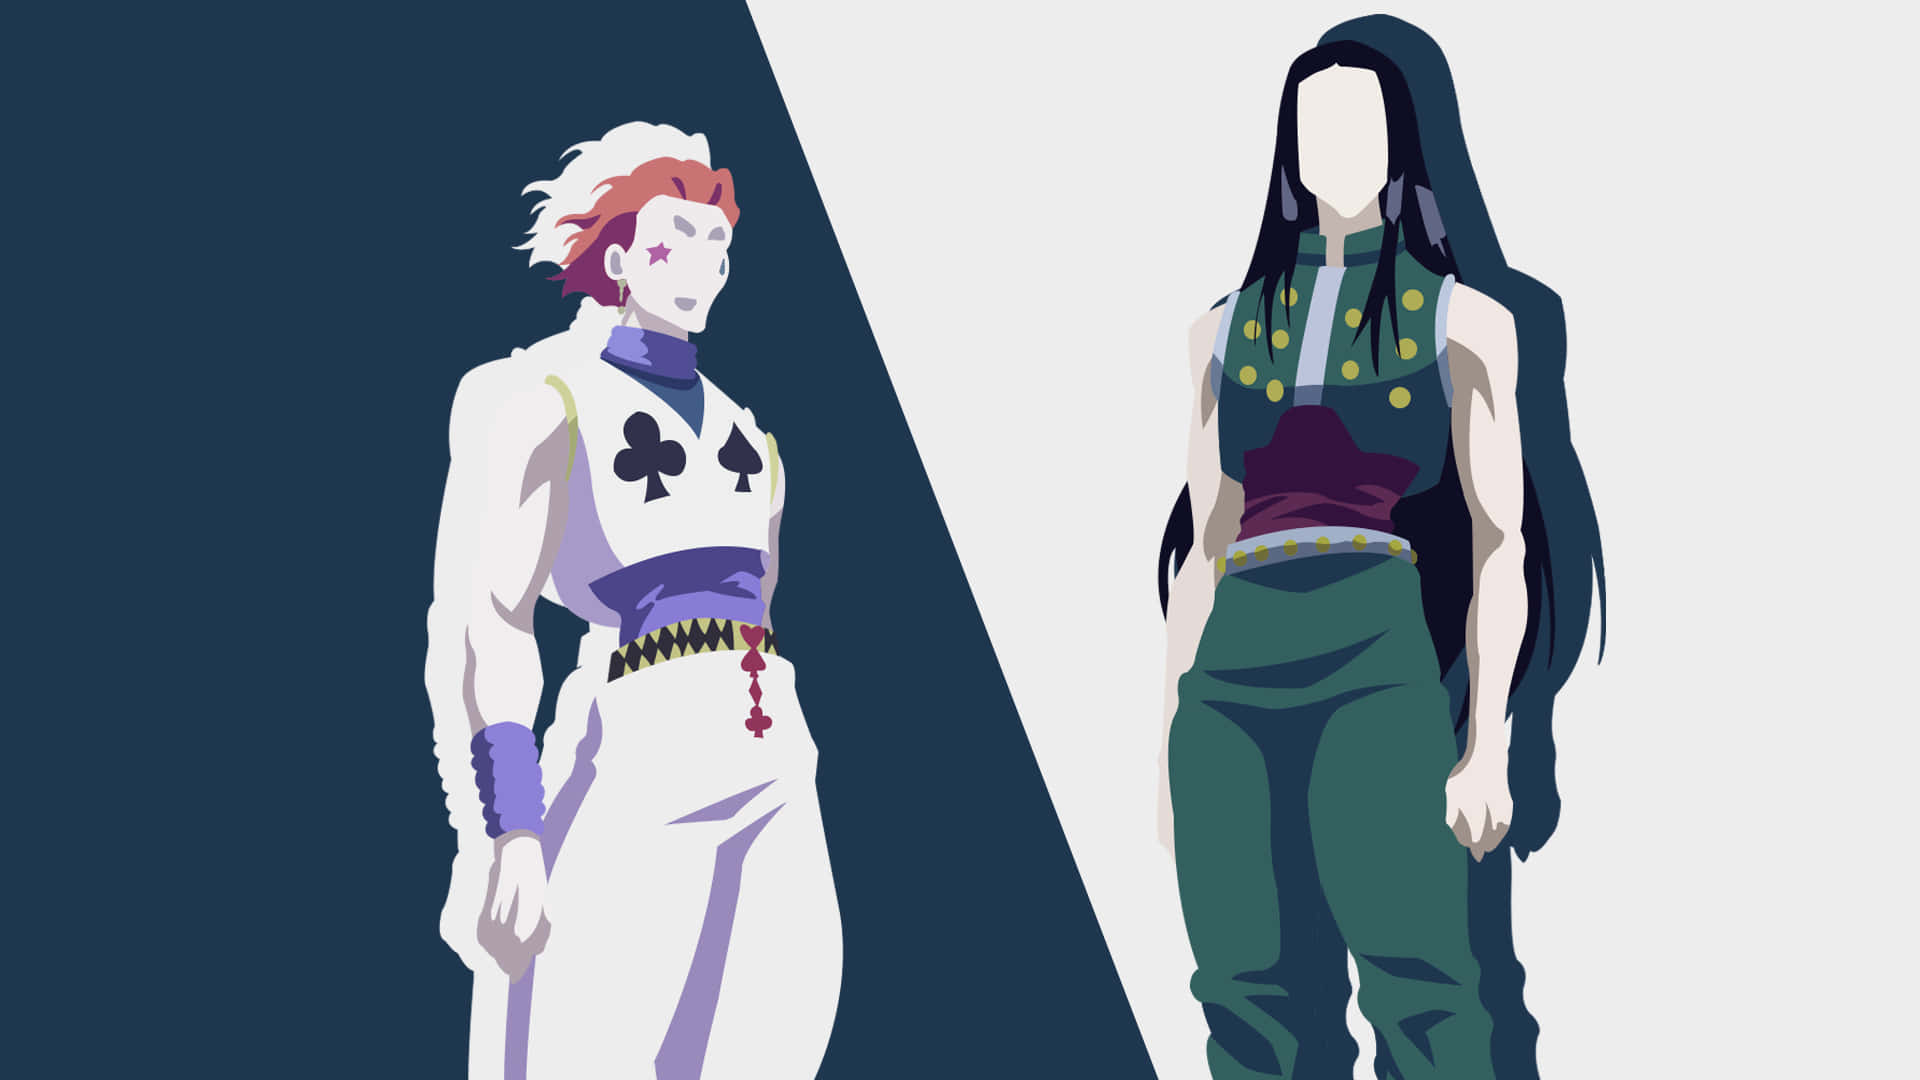 "Illumi Zoldyck stands tall and ready, unwavering in his devotion to his profession." Wallpaper